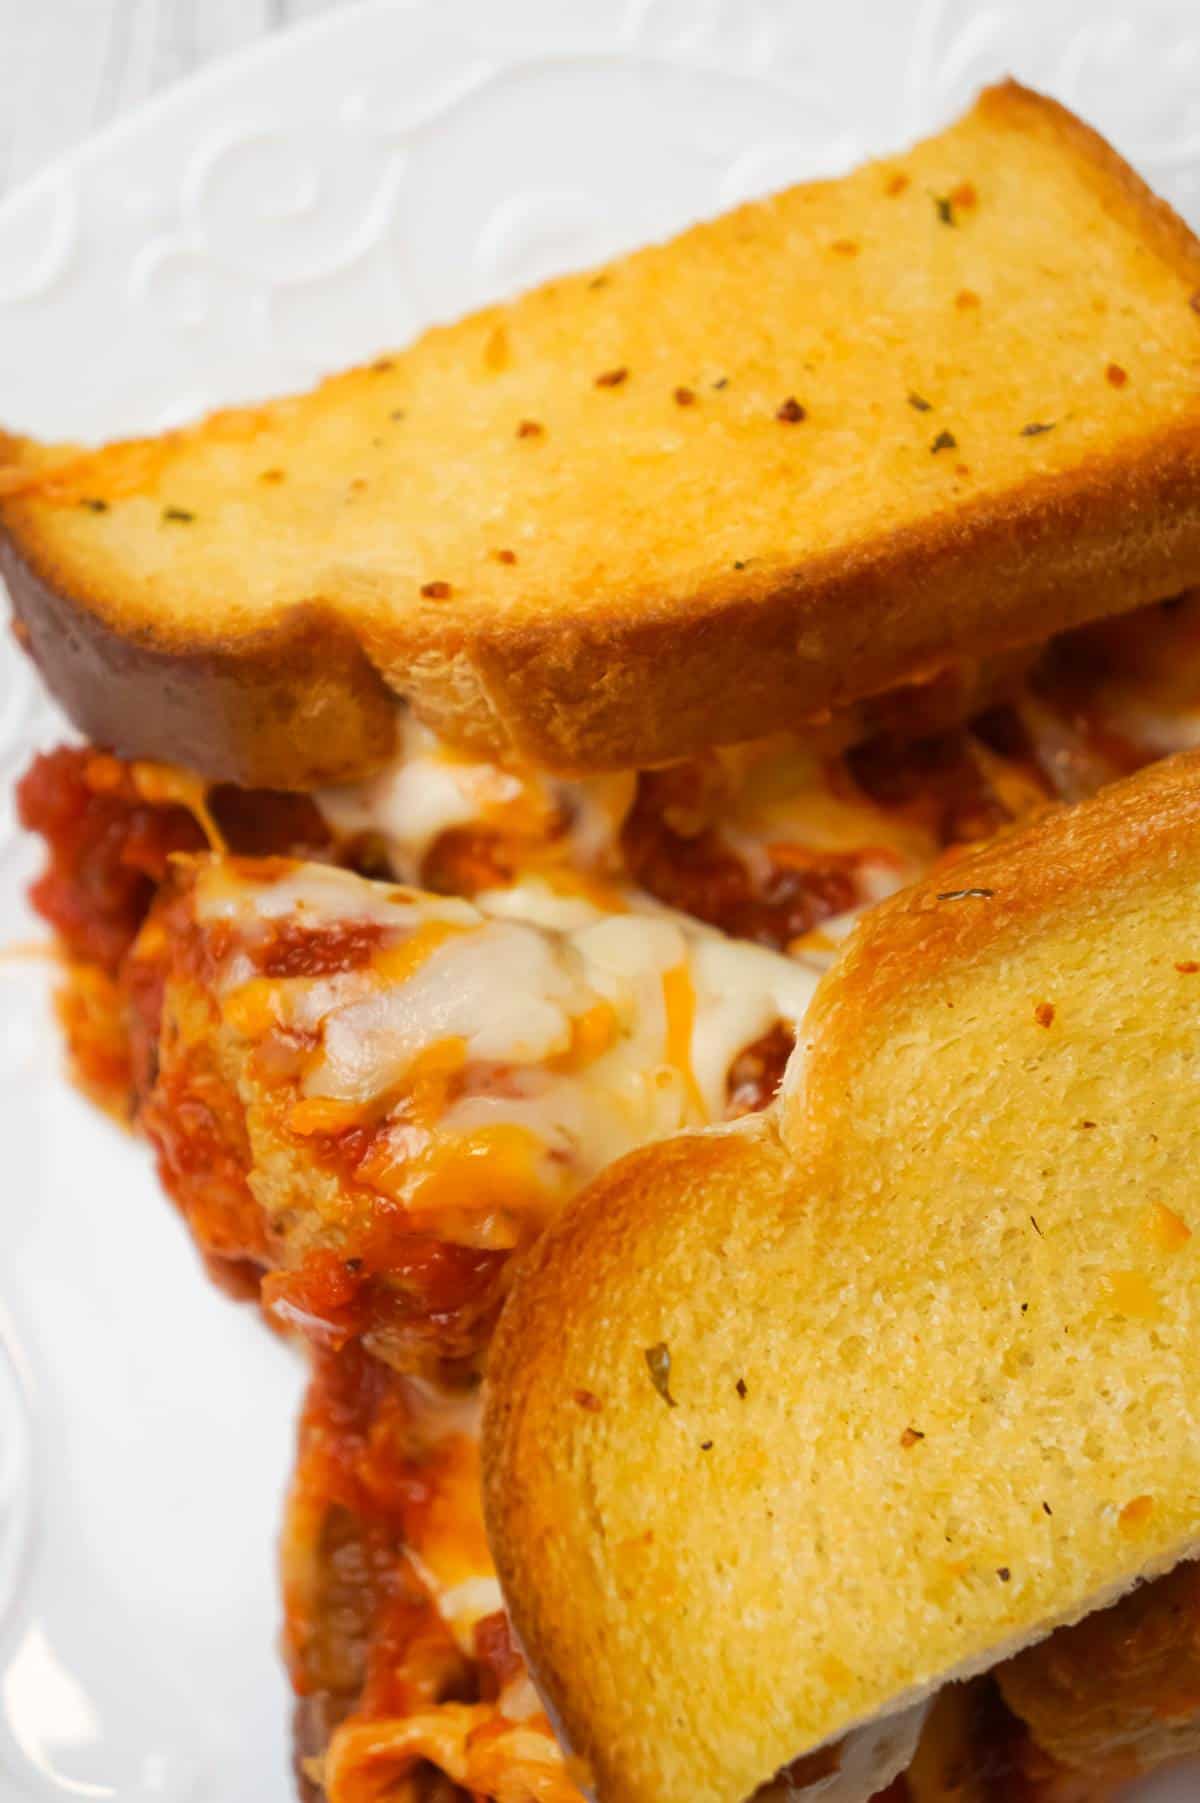 Meatball Sub Grilled Cheese Casserole is an easy casserole recipe made with Italian style meatballs, marinara sauce and loaded with cheese all sandwiched between layers of garlic toast.